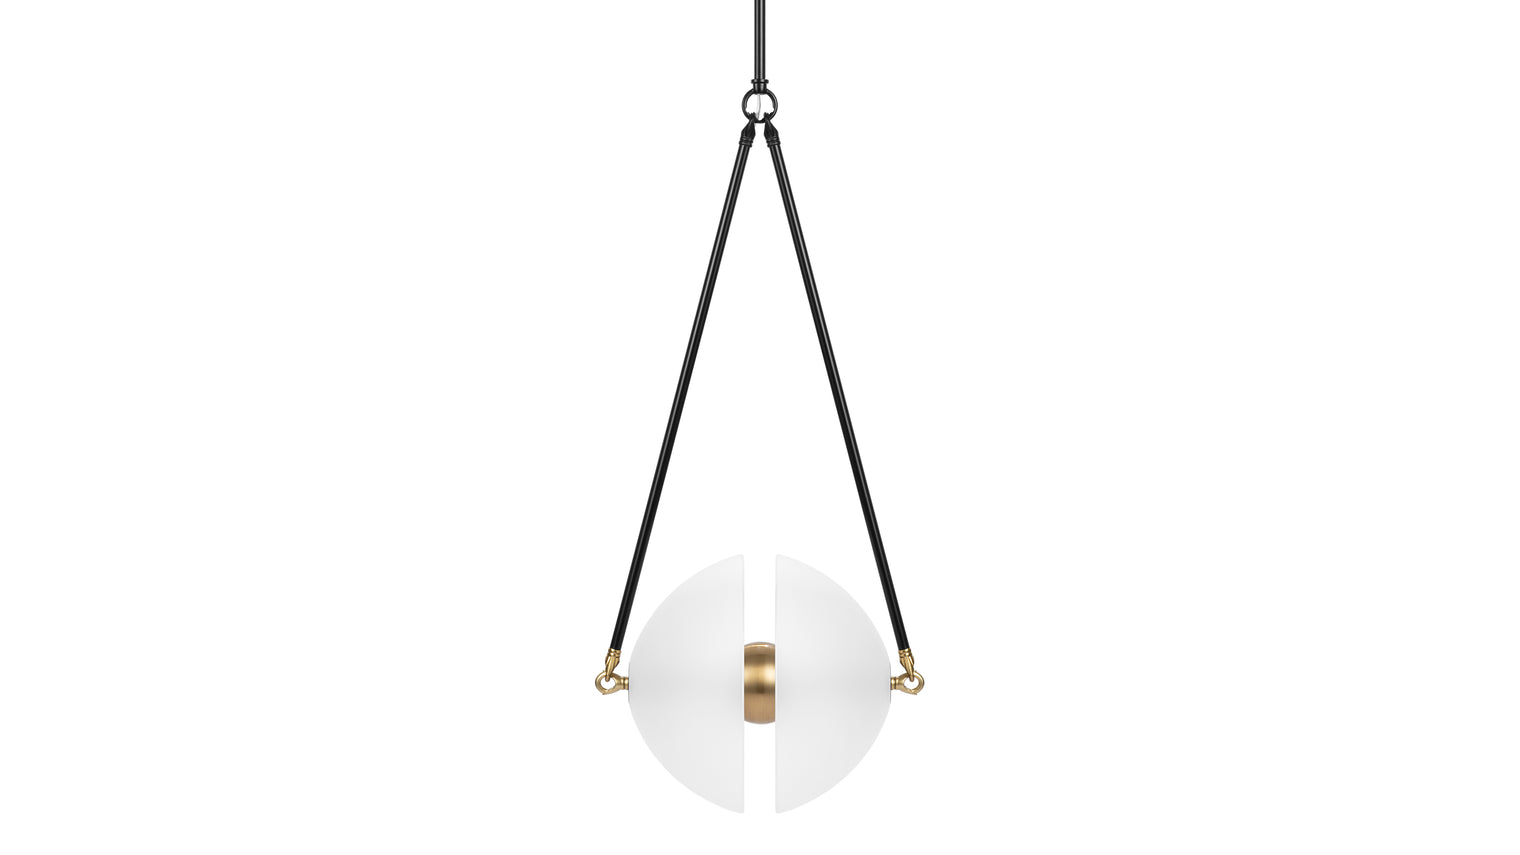 Radiant Brilliance | Inspired by the intricate connections found in neural networks, the Palla pendant features a delicate arrangement of glass suspended from a slender brass frame. The unique arrangement of the light creates a mesmerizing visual display.
